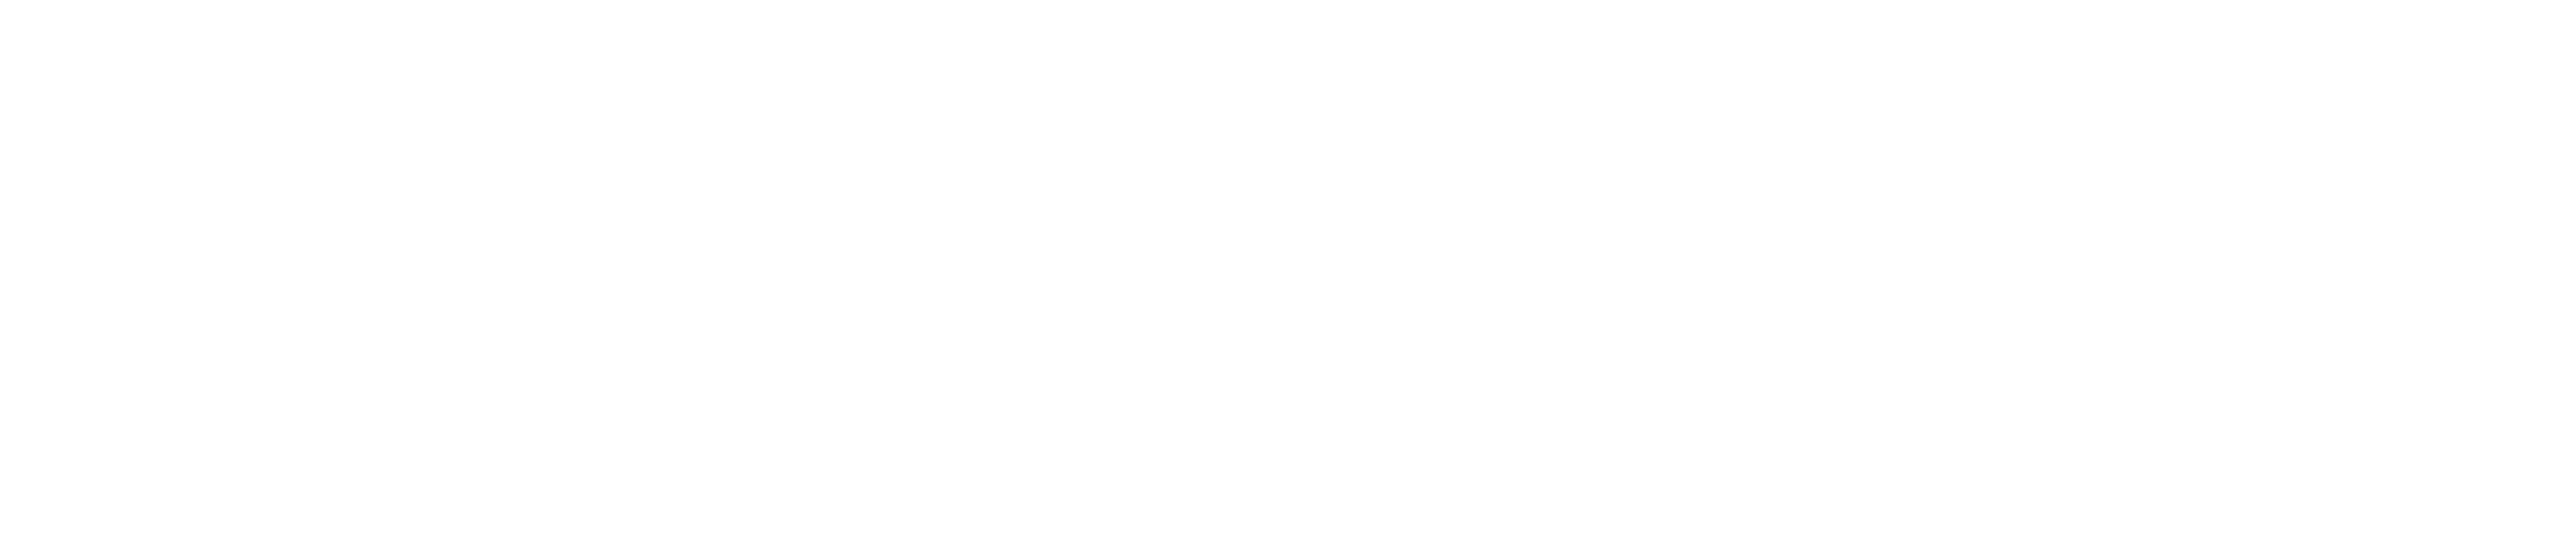 https://campaign-image.eu/zohocampaigns/117090000006664004_zc_v79_1675168787613_en_funded_by_the_eu_white.png